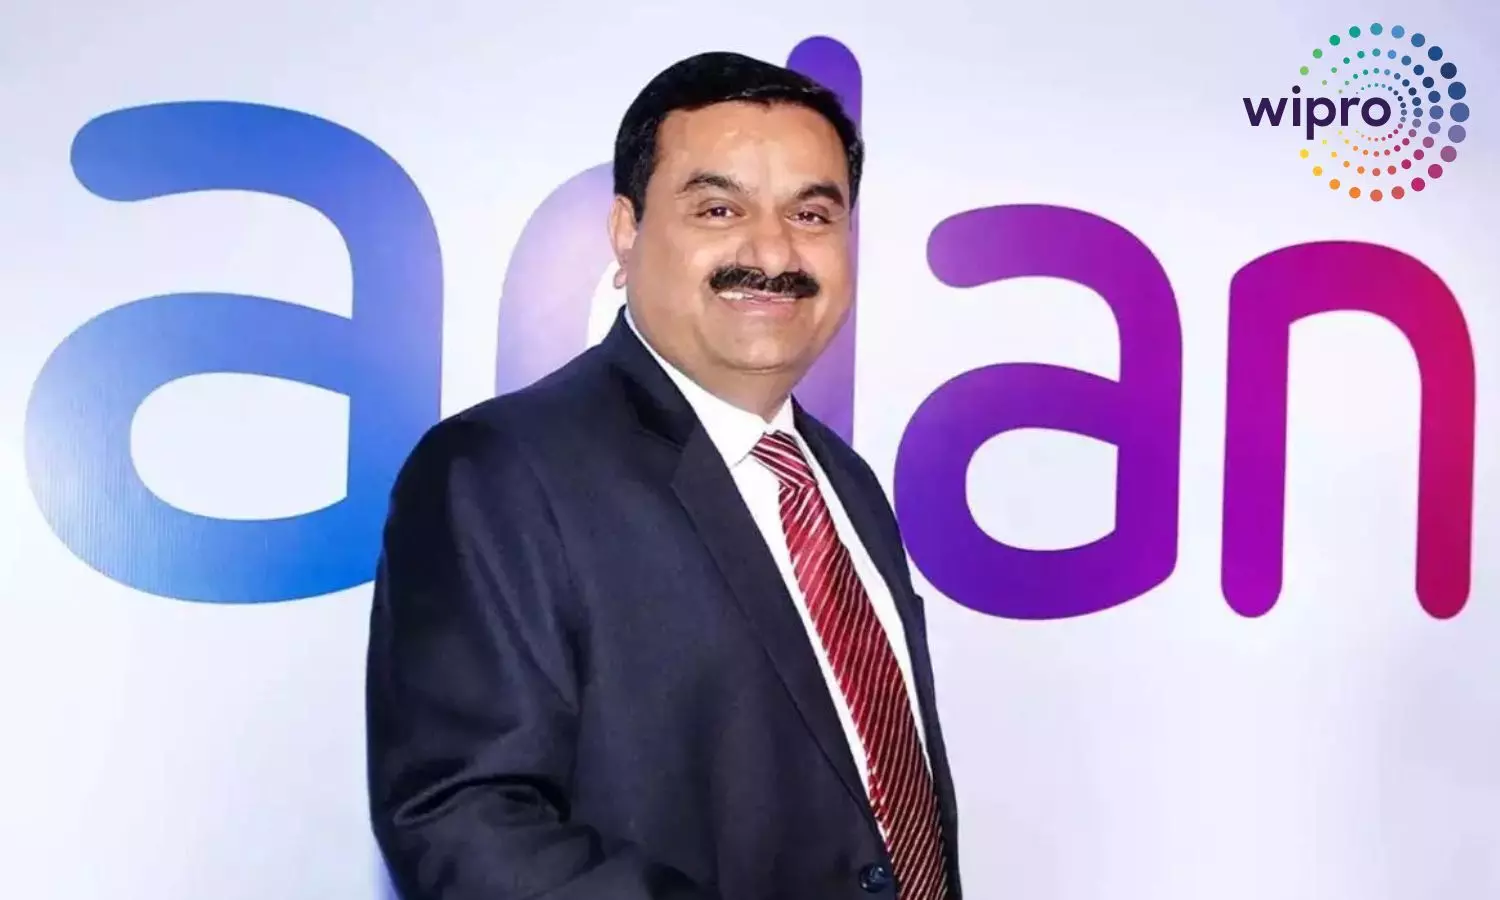 Adani Enterprises set to replace Wipro in Sensex: Implications for investors and market dynamics